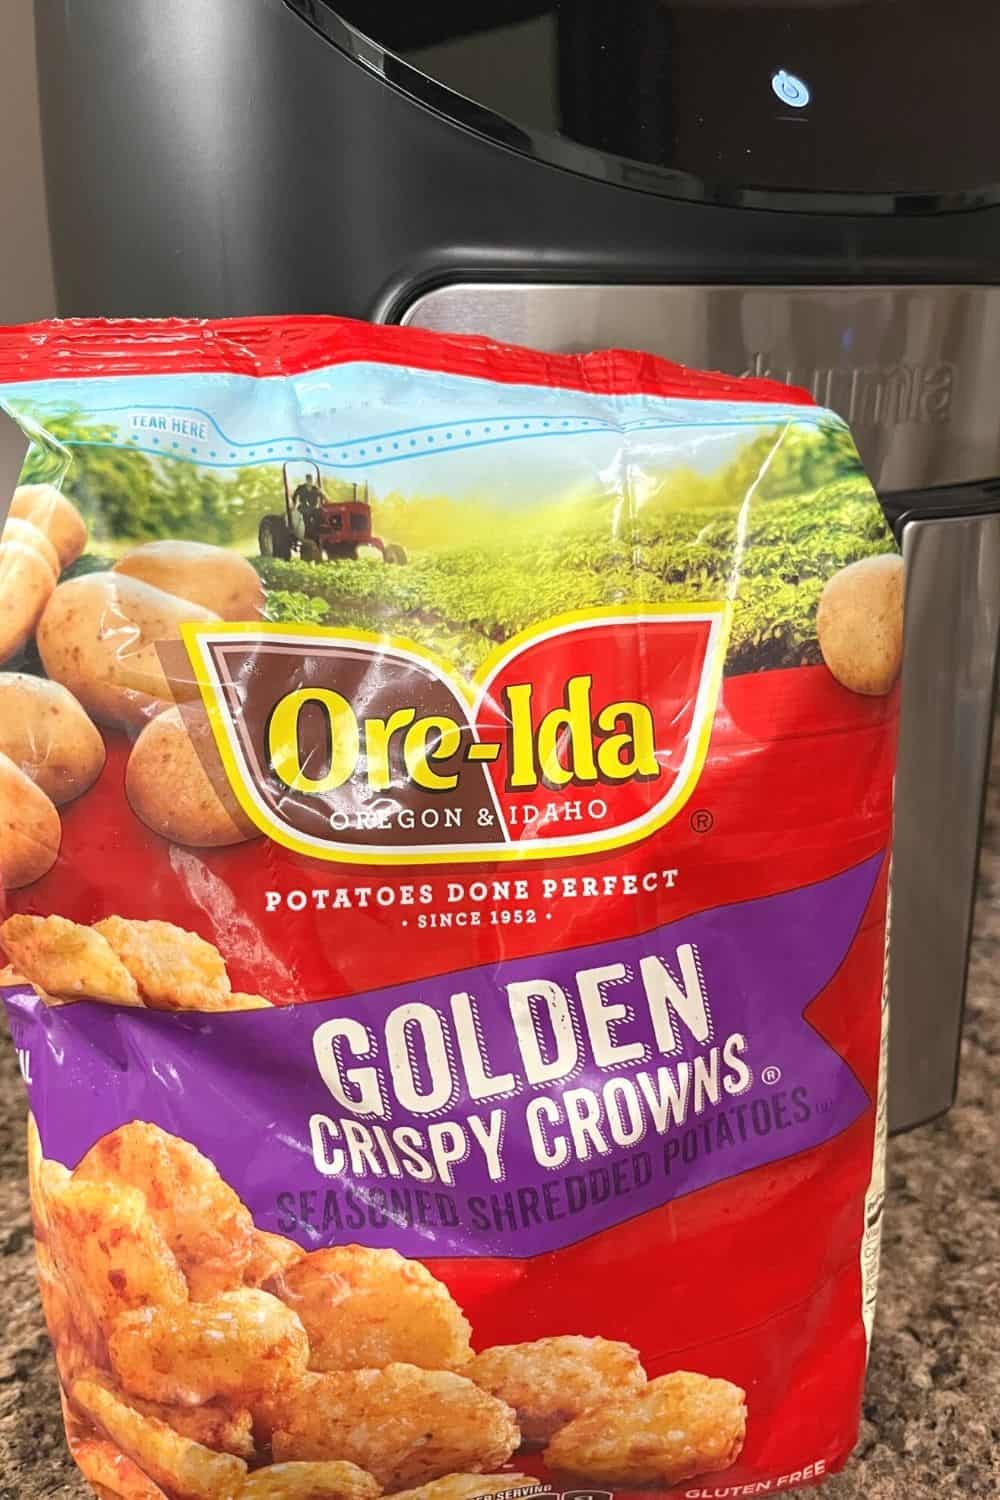 A bag of Ore Ida Golden Crispy Crowns in front of an air fryer